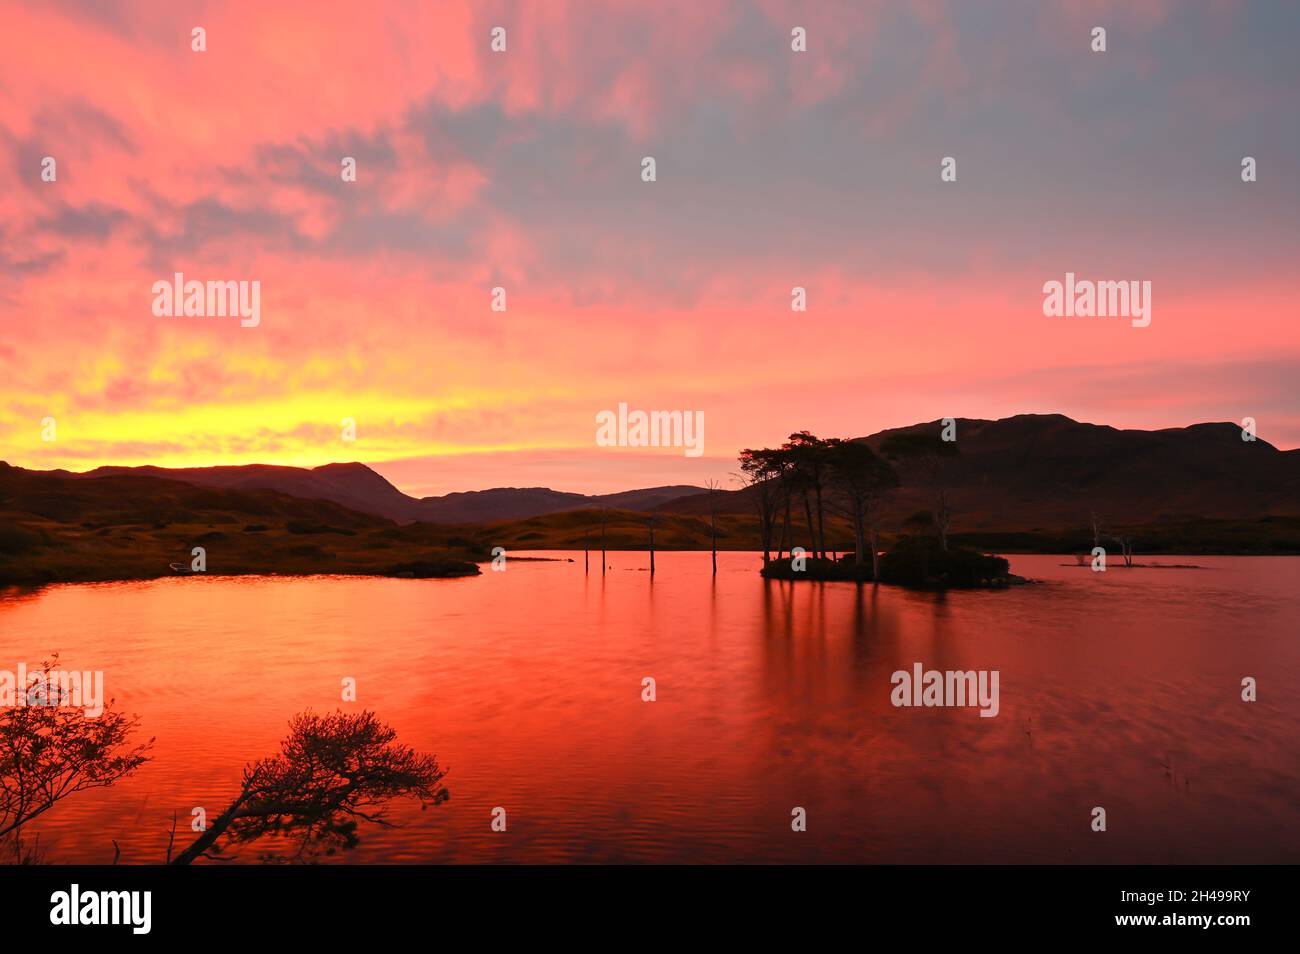 Stunning sunrise over Loch Assynt in Sutherland, Scottish Highlands. On NC500 route. Silhouettes of trees on island on loch, hills in background. Stock Photo